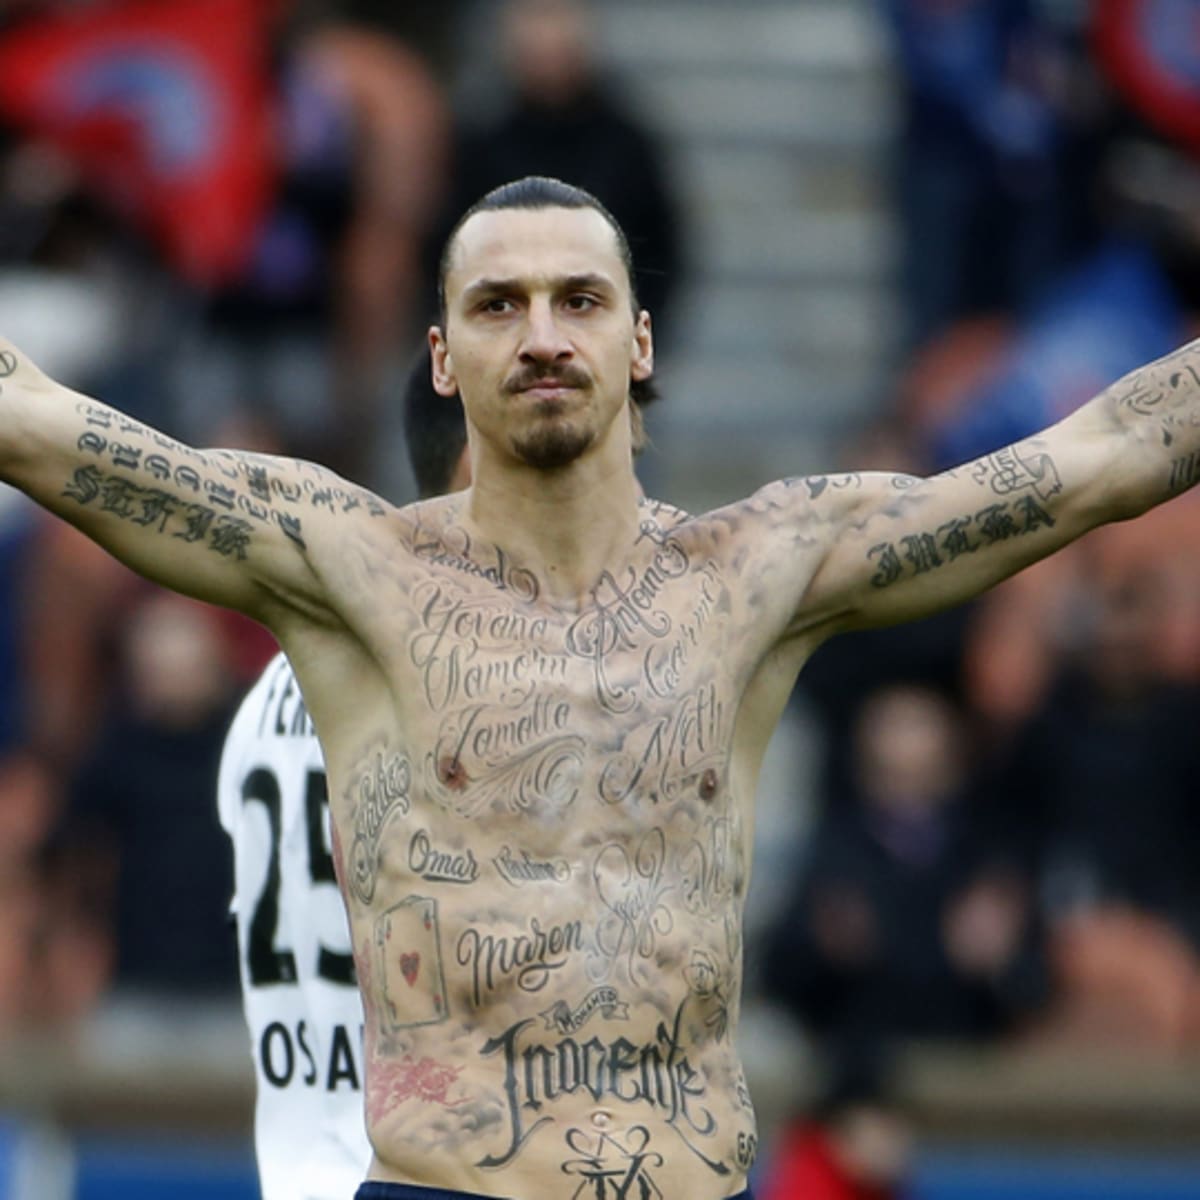 Ibrahimovic Reveals 15 Tattoos Of Real People Suffering From Hunger -  Futbolita